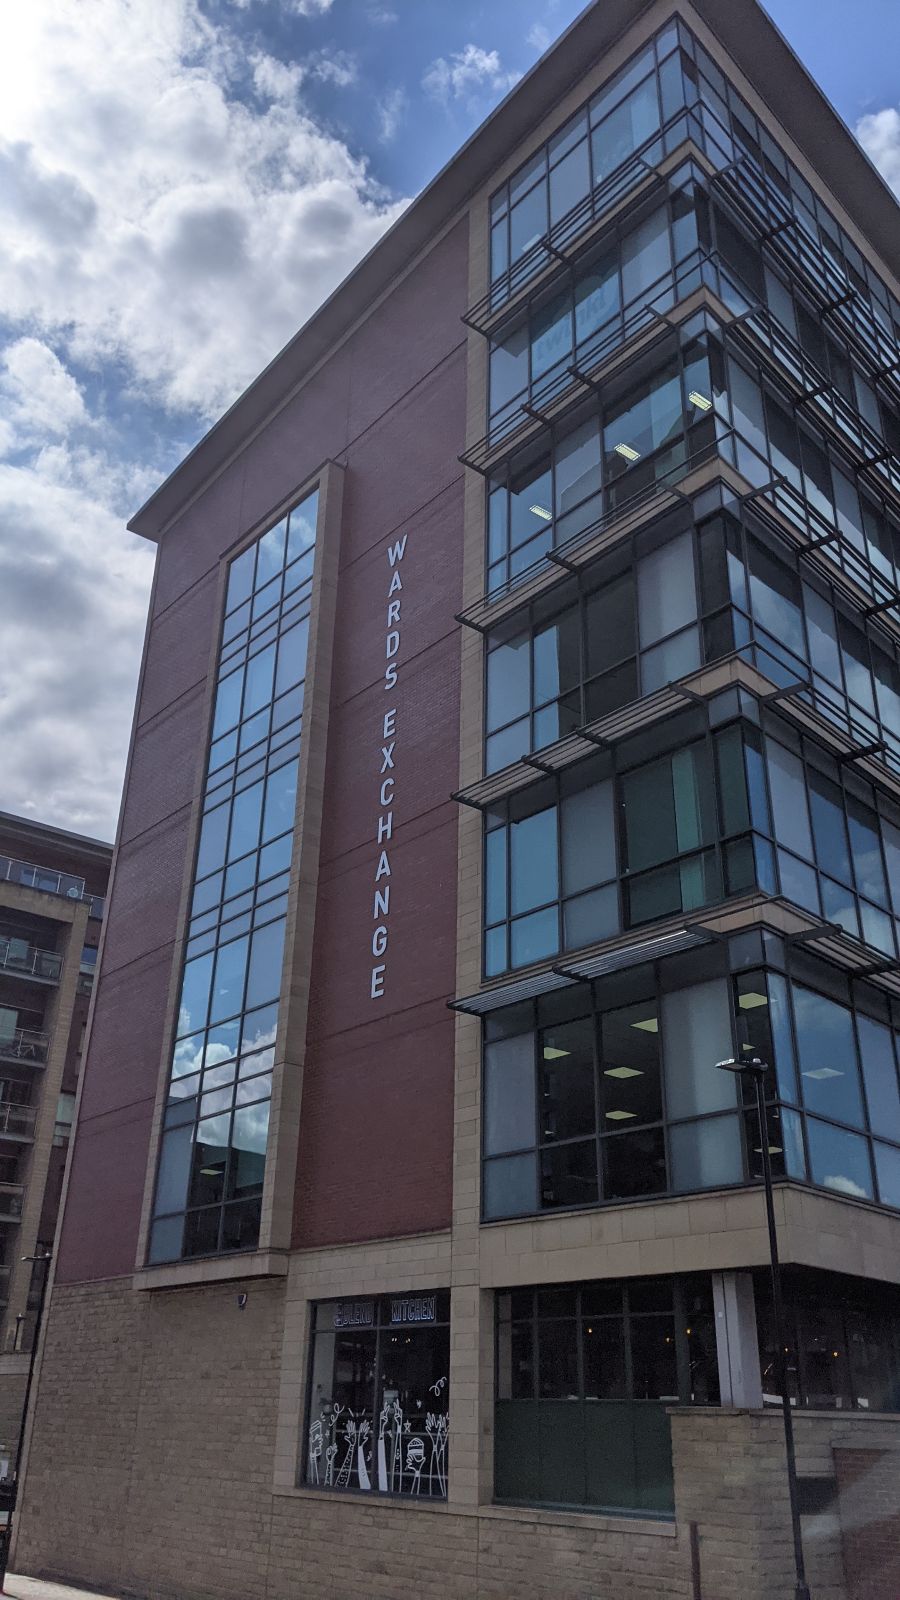 Our Sheffield office building